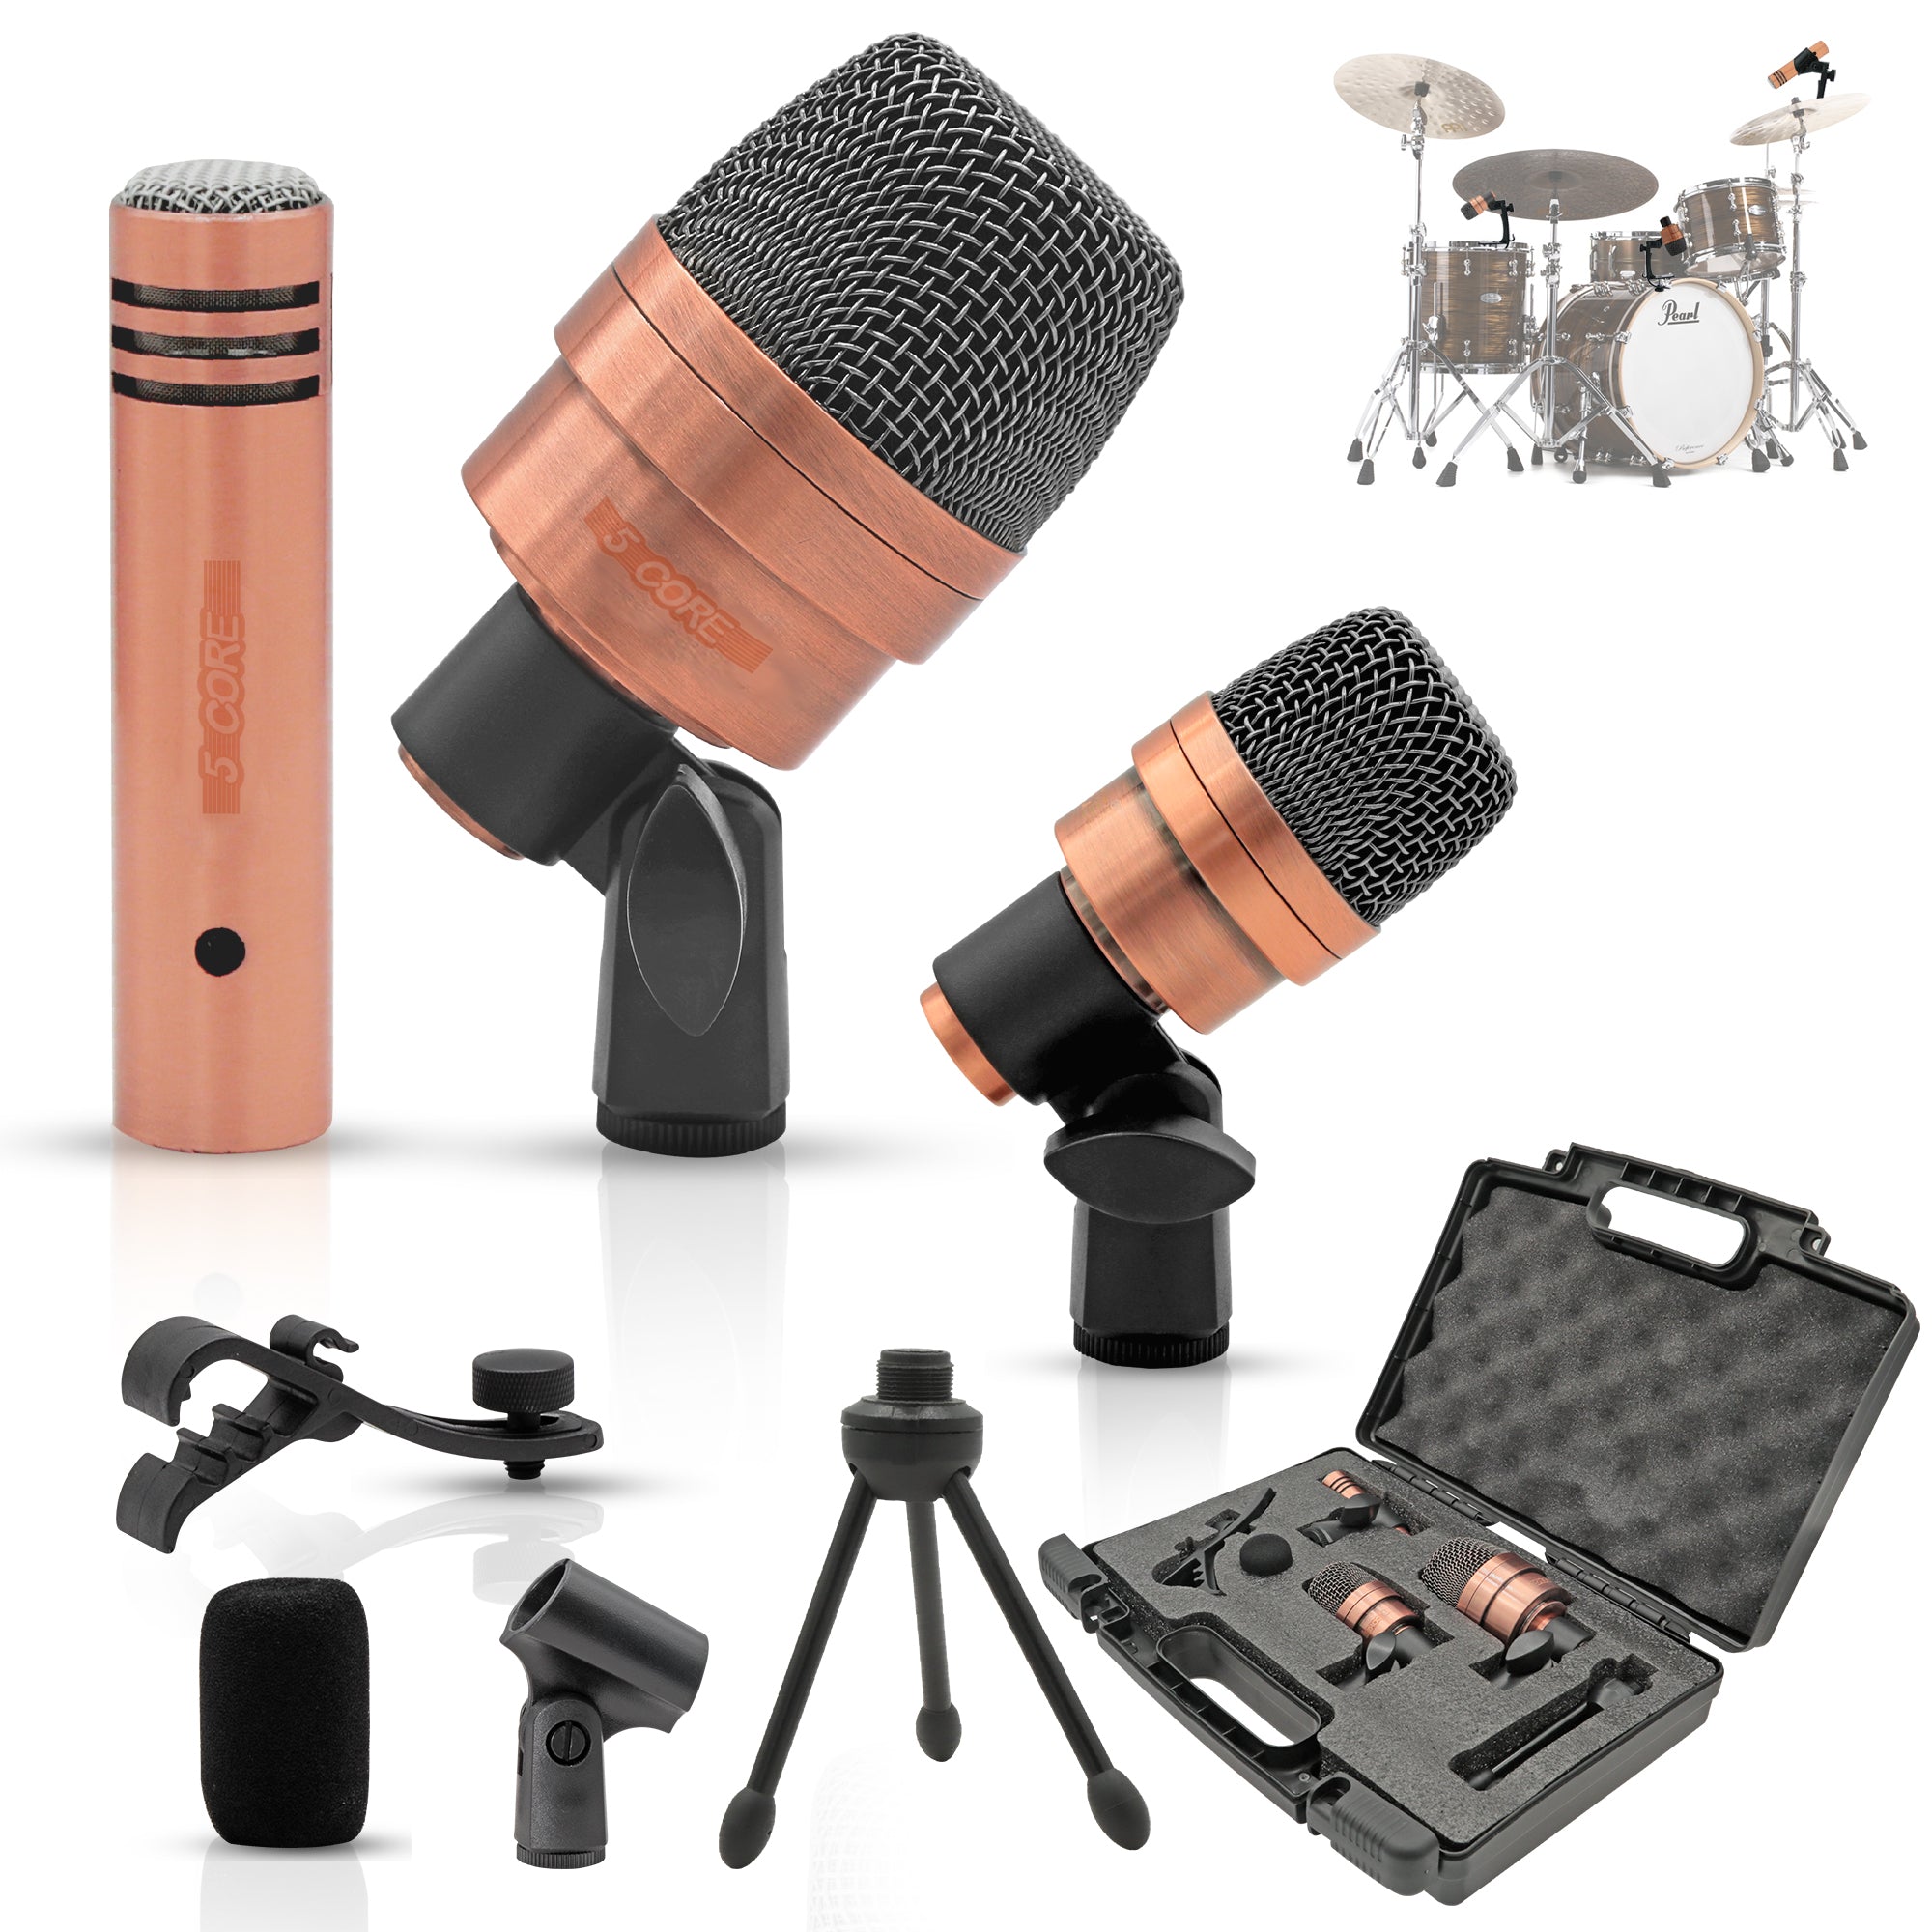 5 Core Drum Microphone Kit Copper Finish 3 Pieces Drumming Mics Full Metal Wired Dynamic Instrument Mic Set for Bass Tom Snare Cymbals - DM 7XP COPPEREX